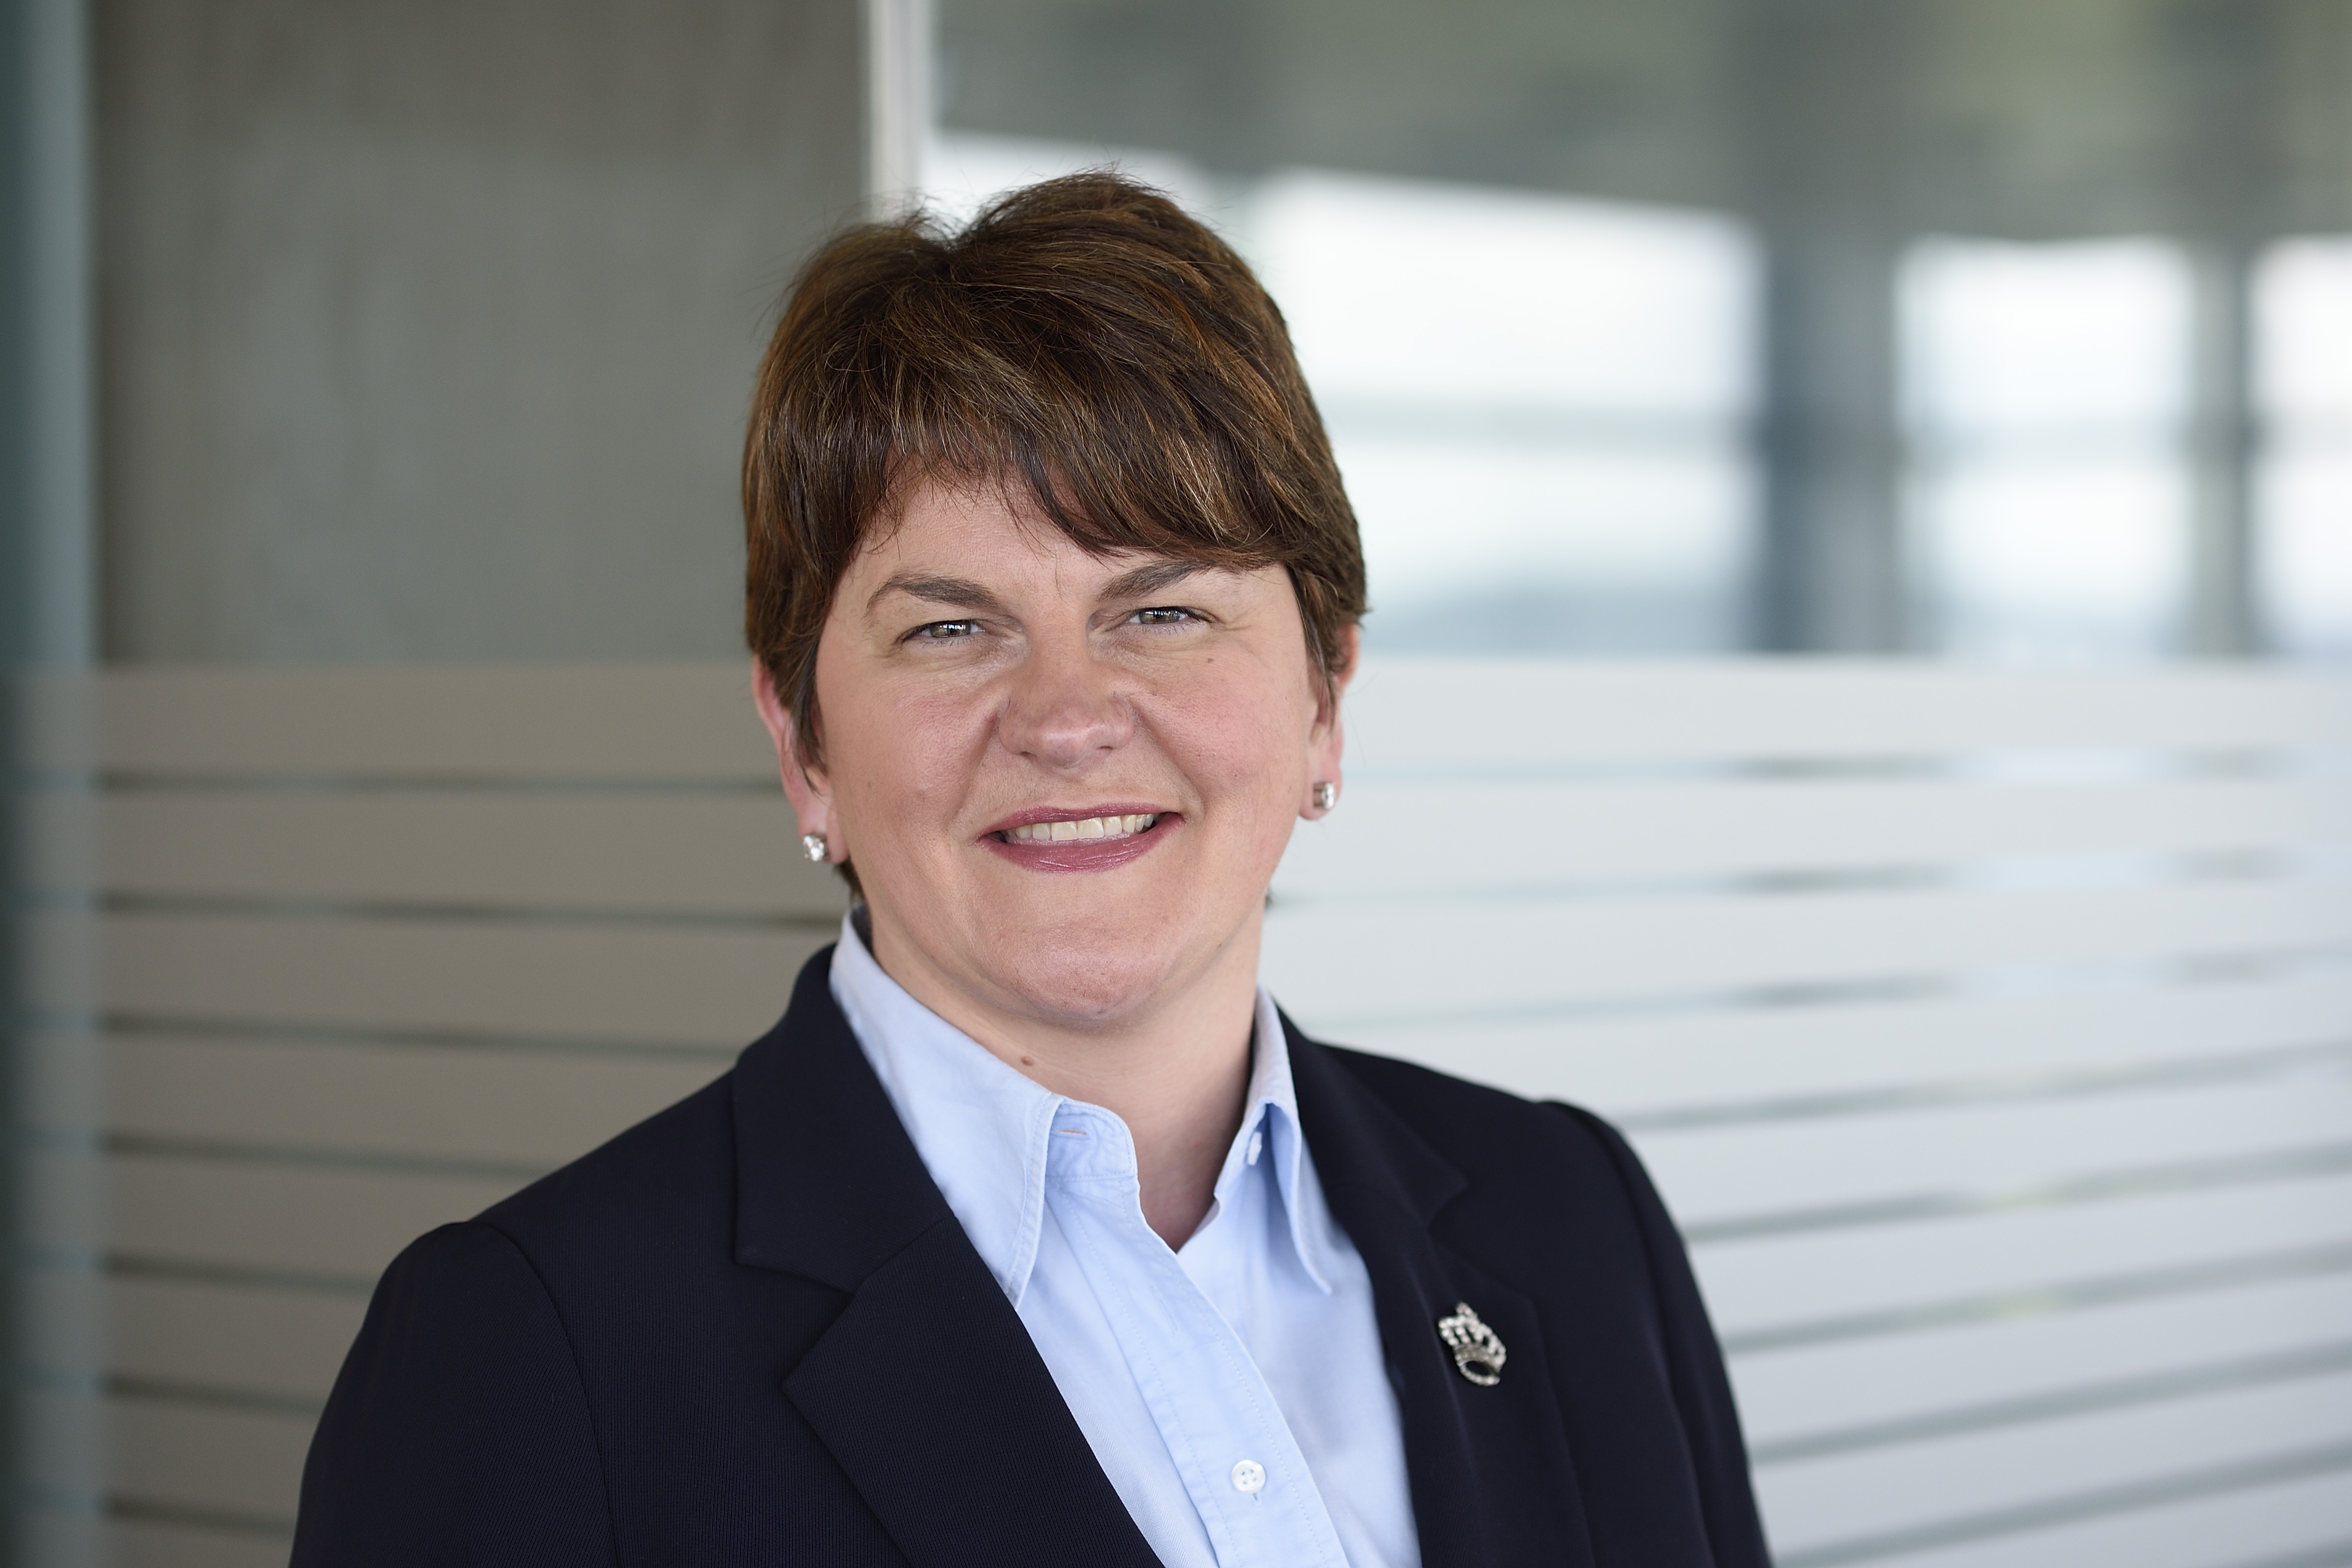 Arlene Foster - Fostering ambition: We profile politician Arlene Foster ... - Arlene foster says spare uk jabs should be offered to ireland.